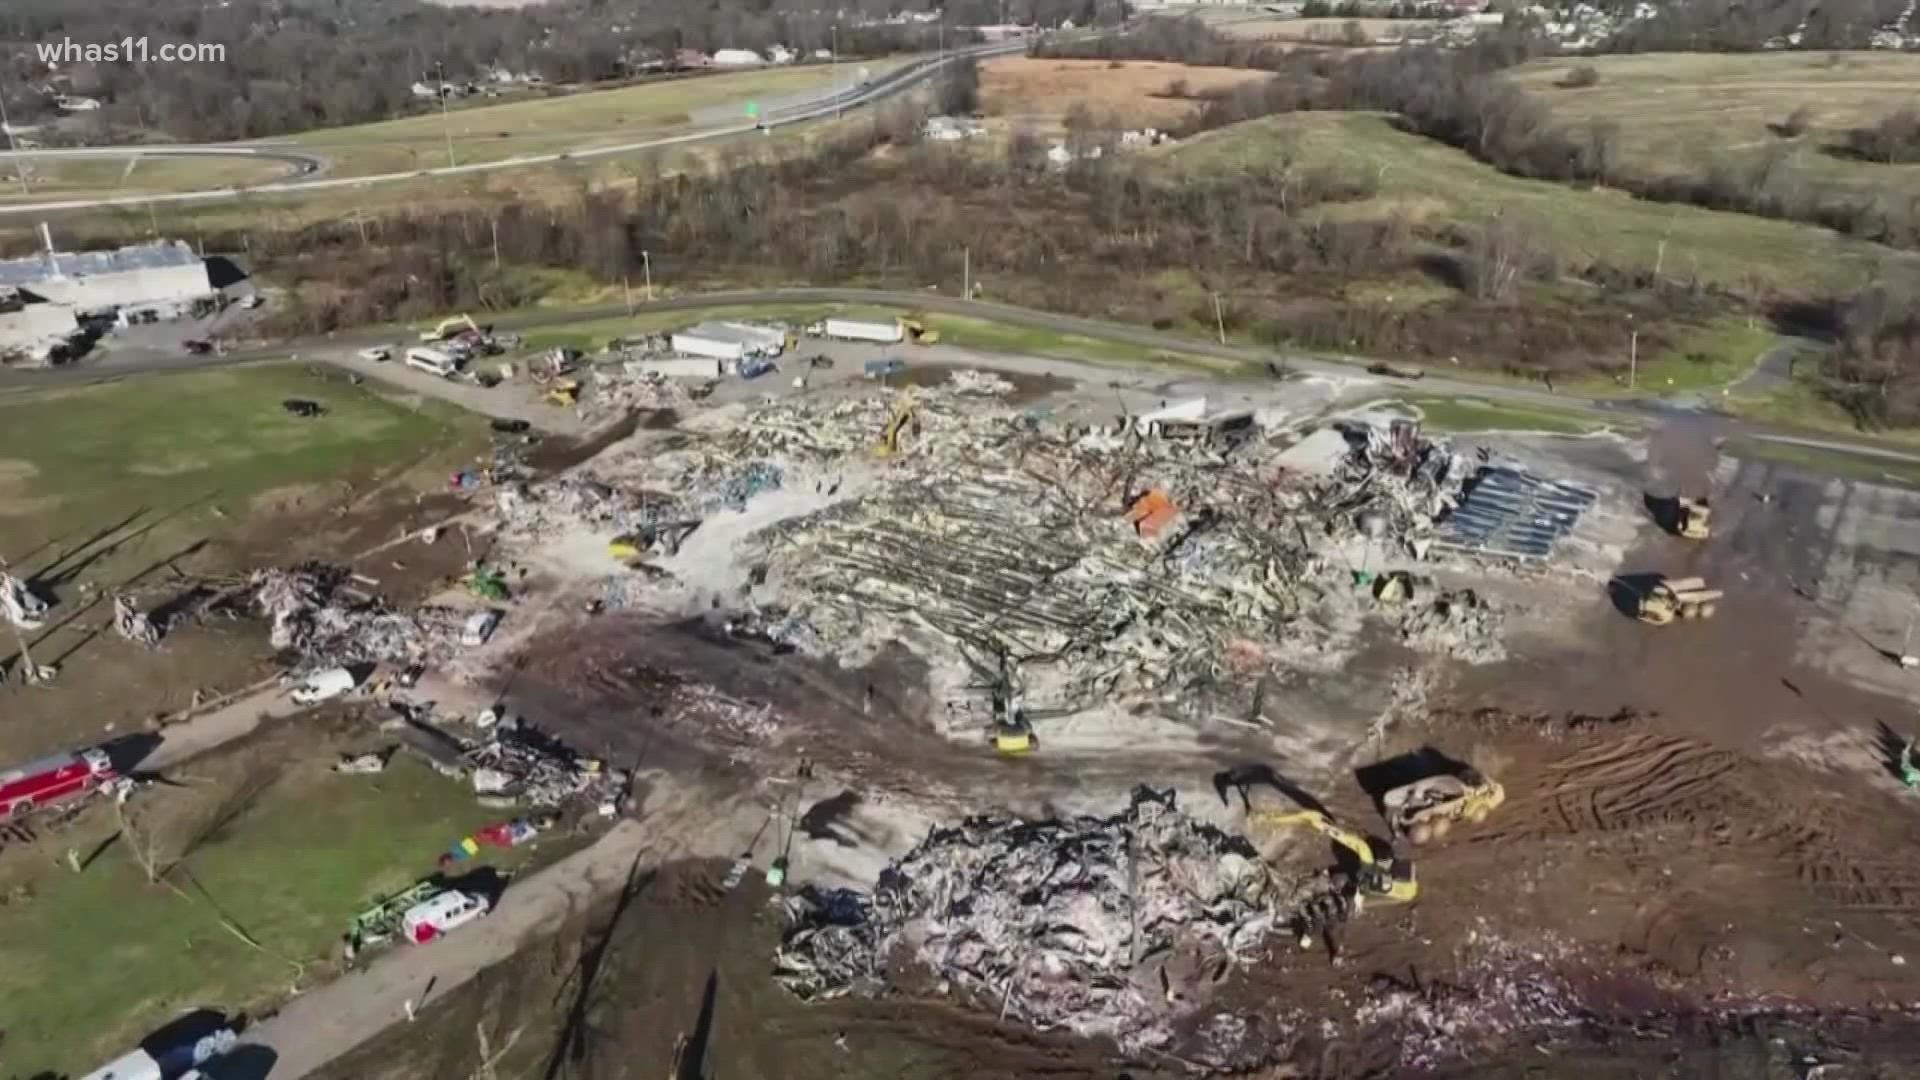 The tornado caused widespread damage in Kentucky.